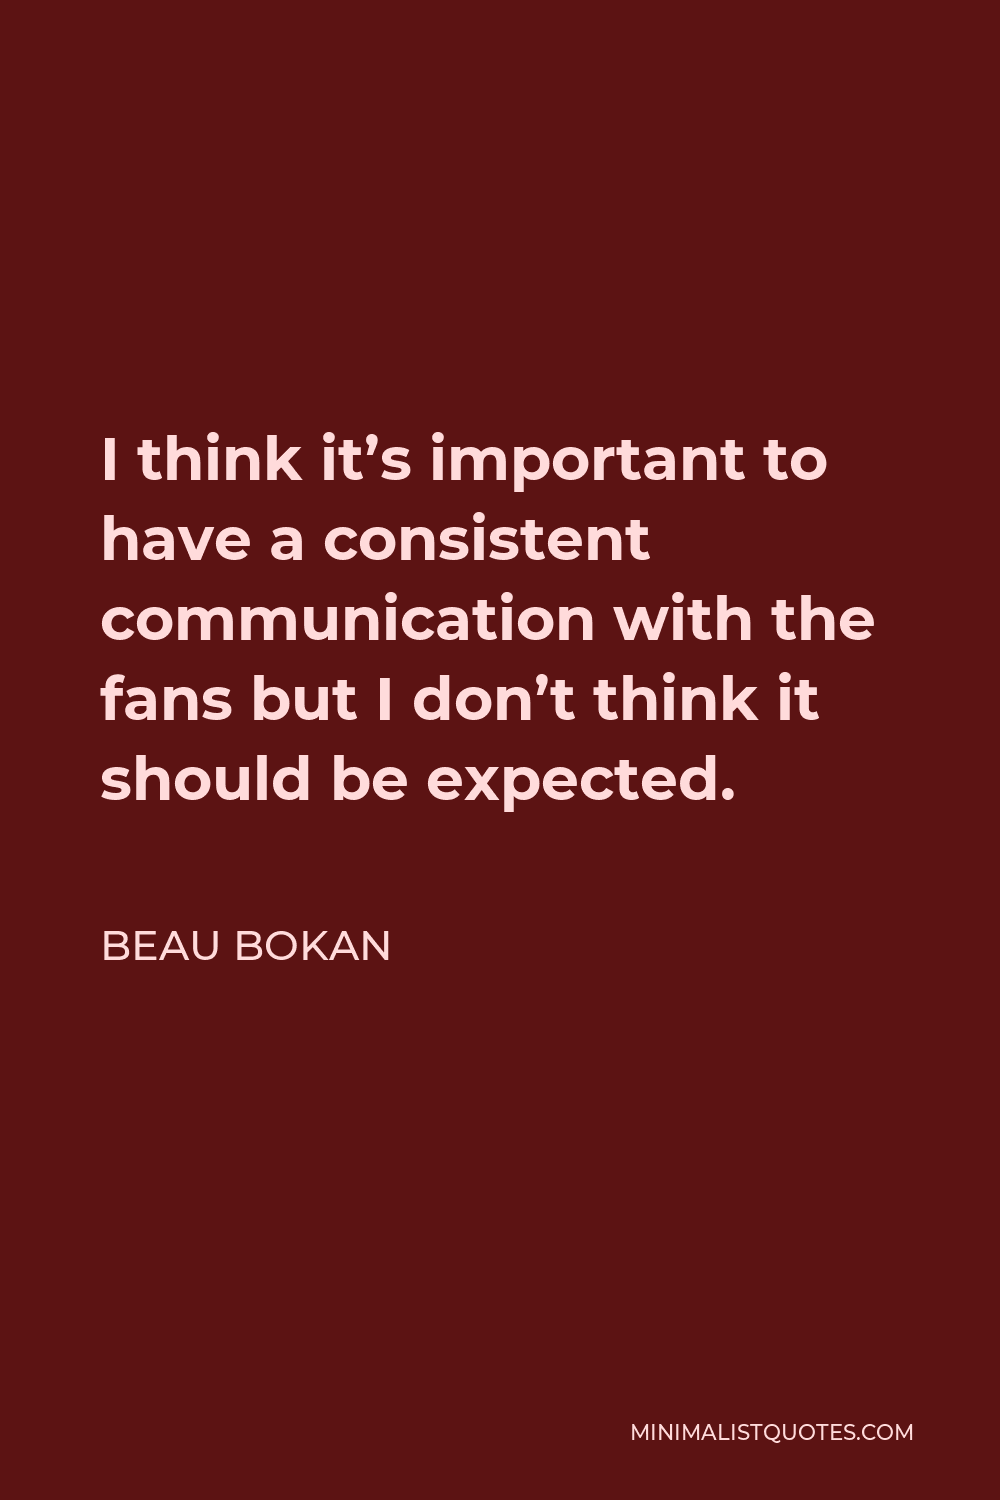 Beau Bokan Quote - I think it’s important to have a consistent communication with the fans but I don’t think it should be expected.